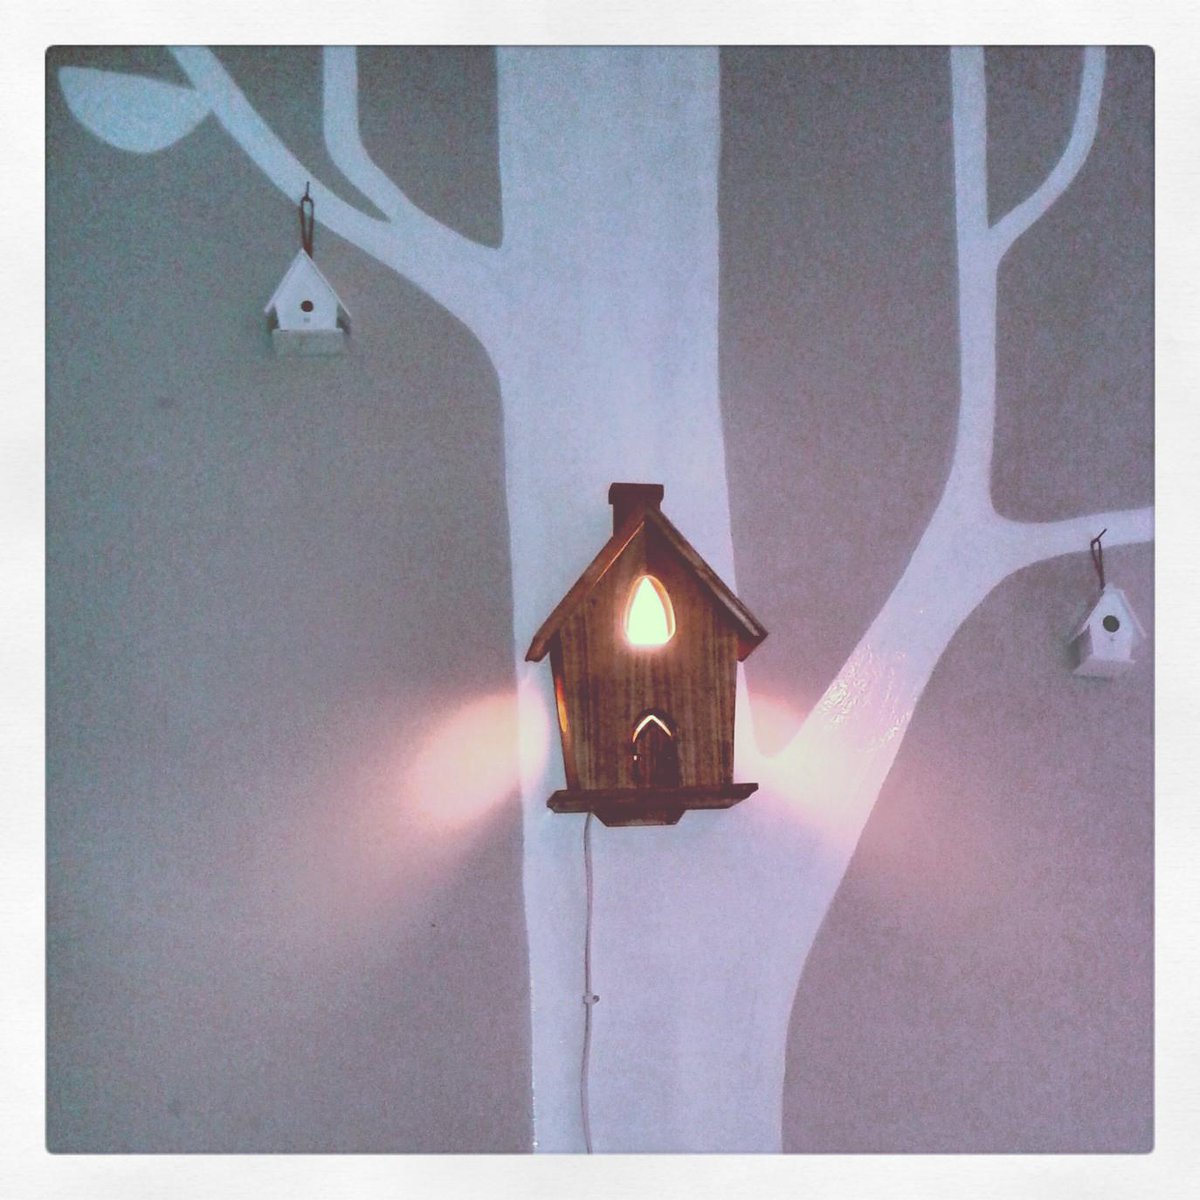 Hand carved cherry wood nursery light made by #Woolleywood on Etsy